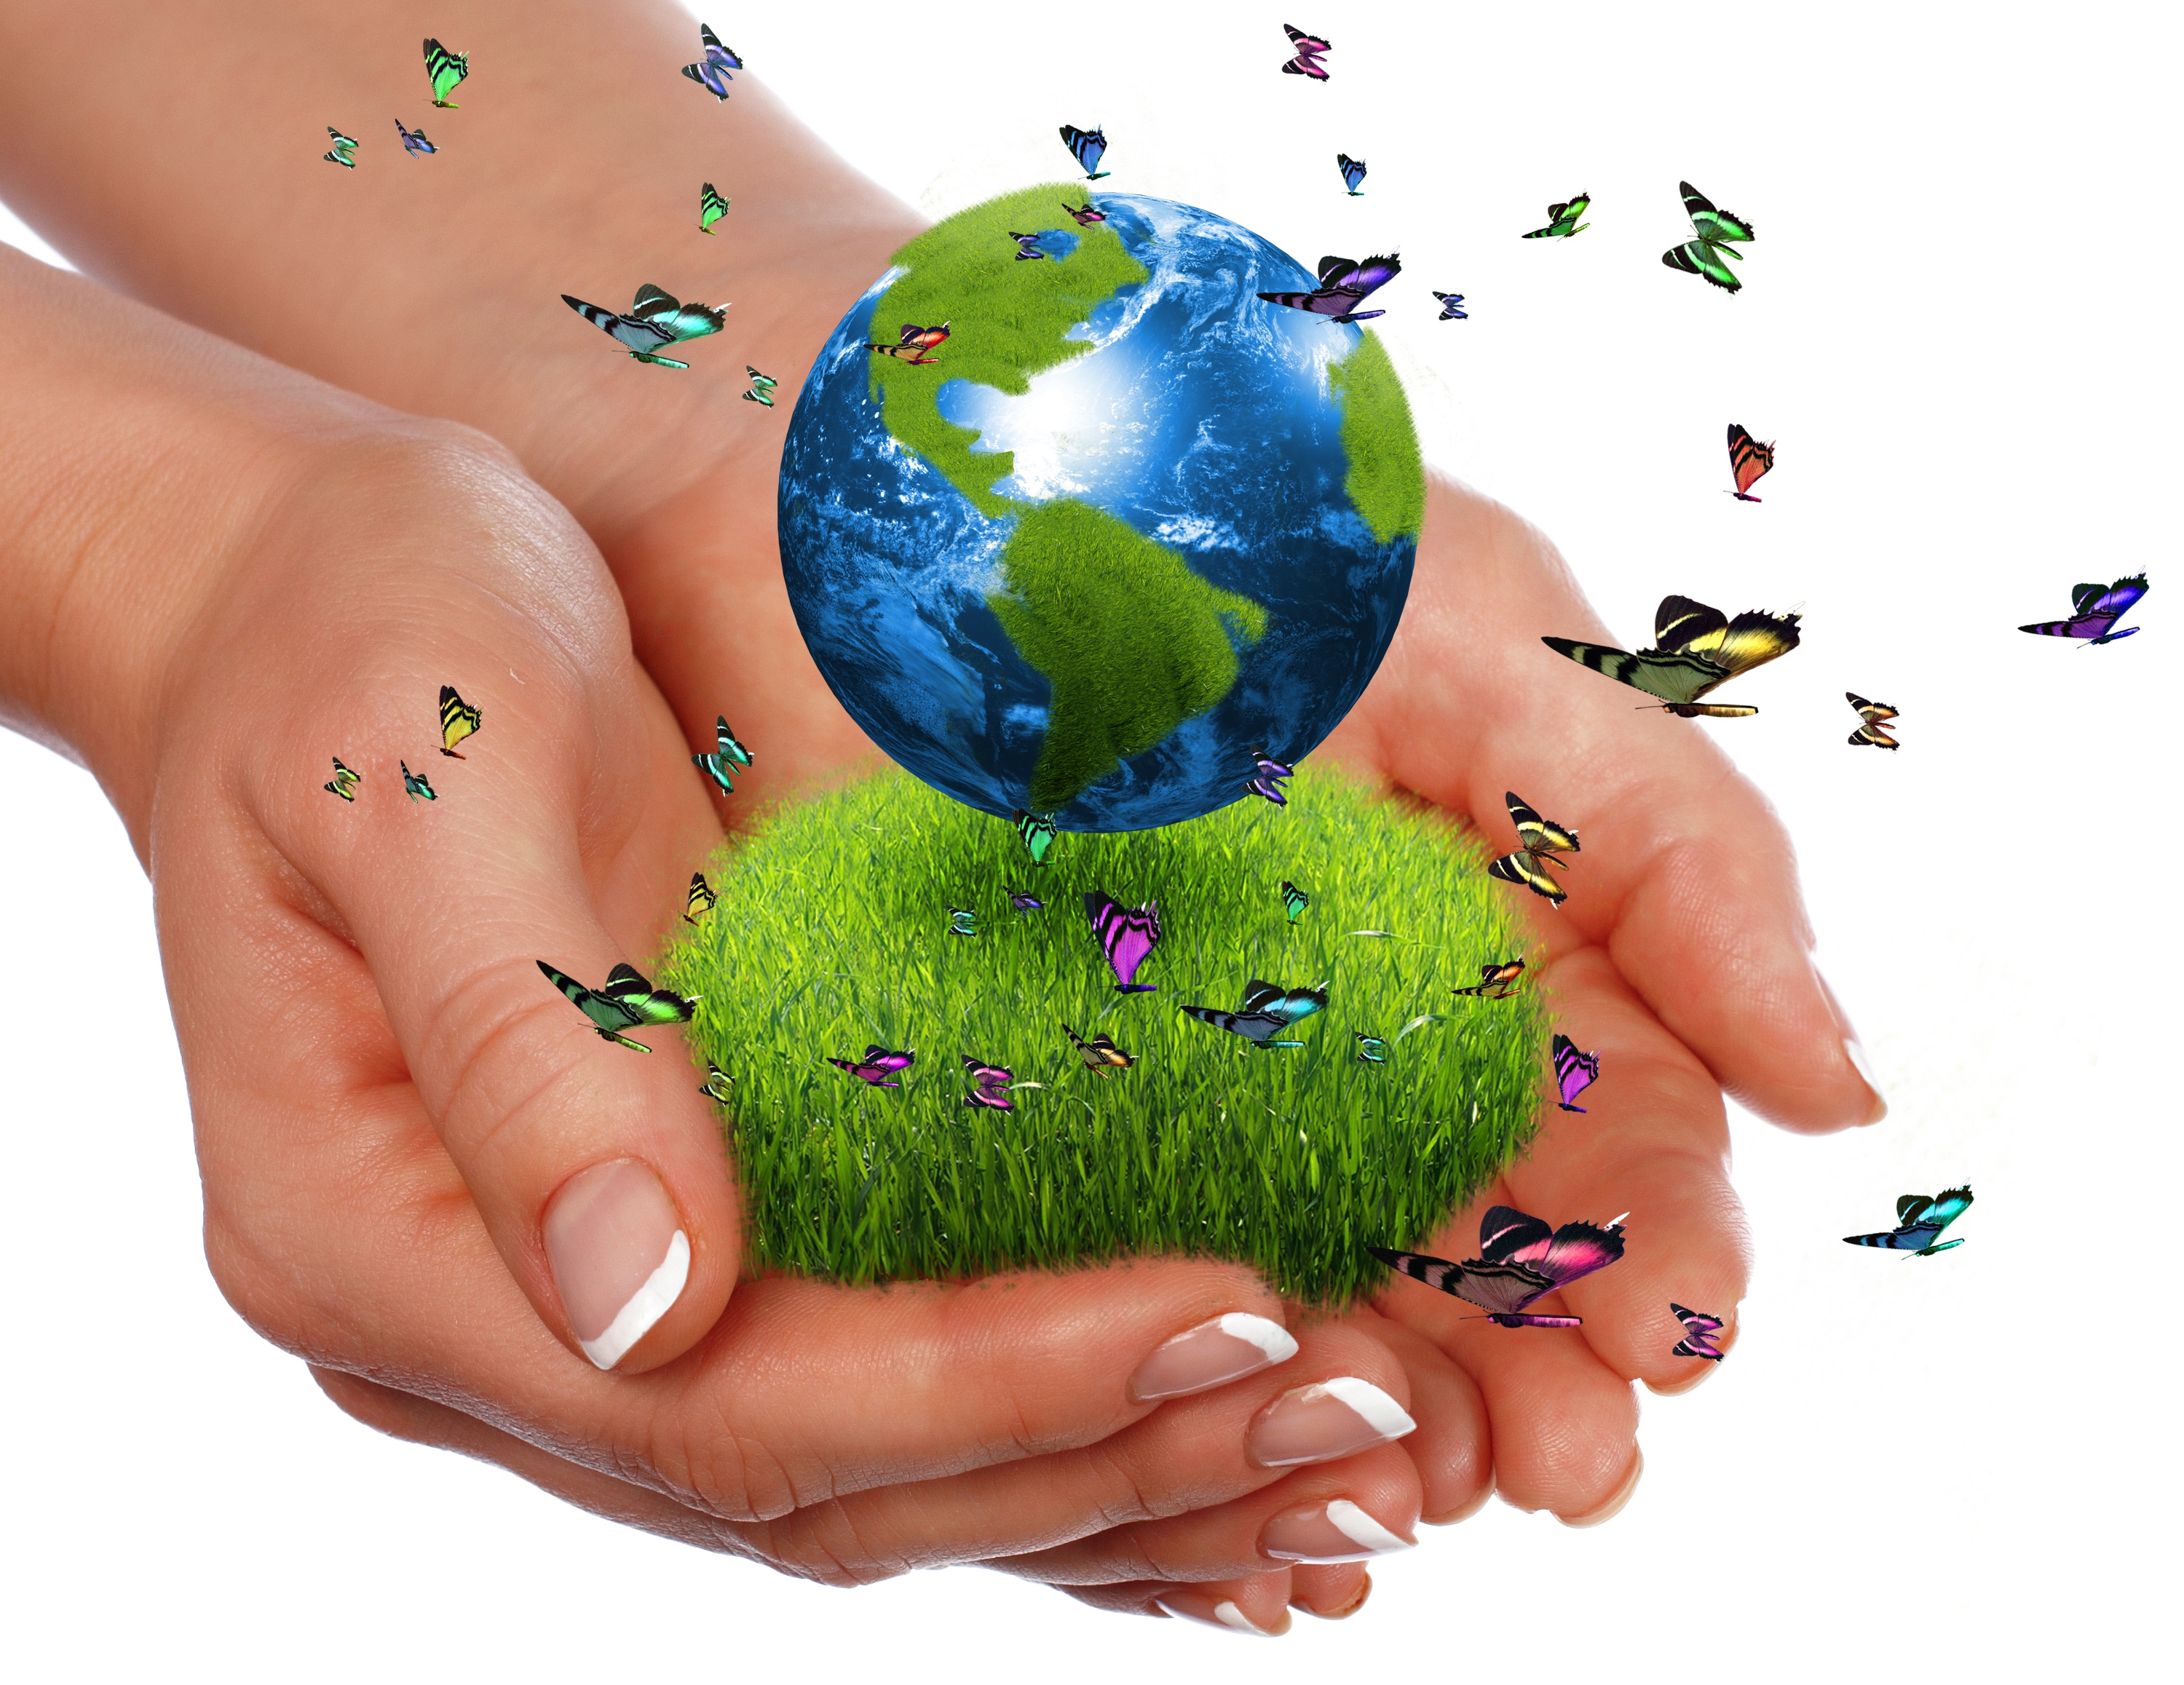 grass, earth day, holiday, butterfly, earth, hand, planet